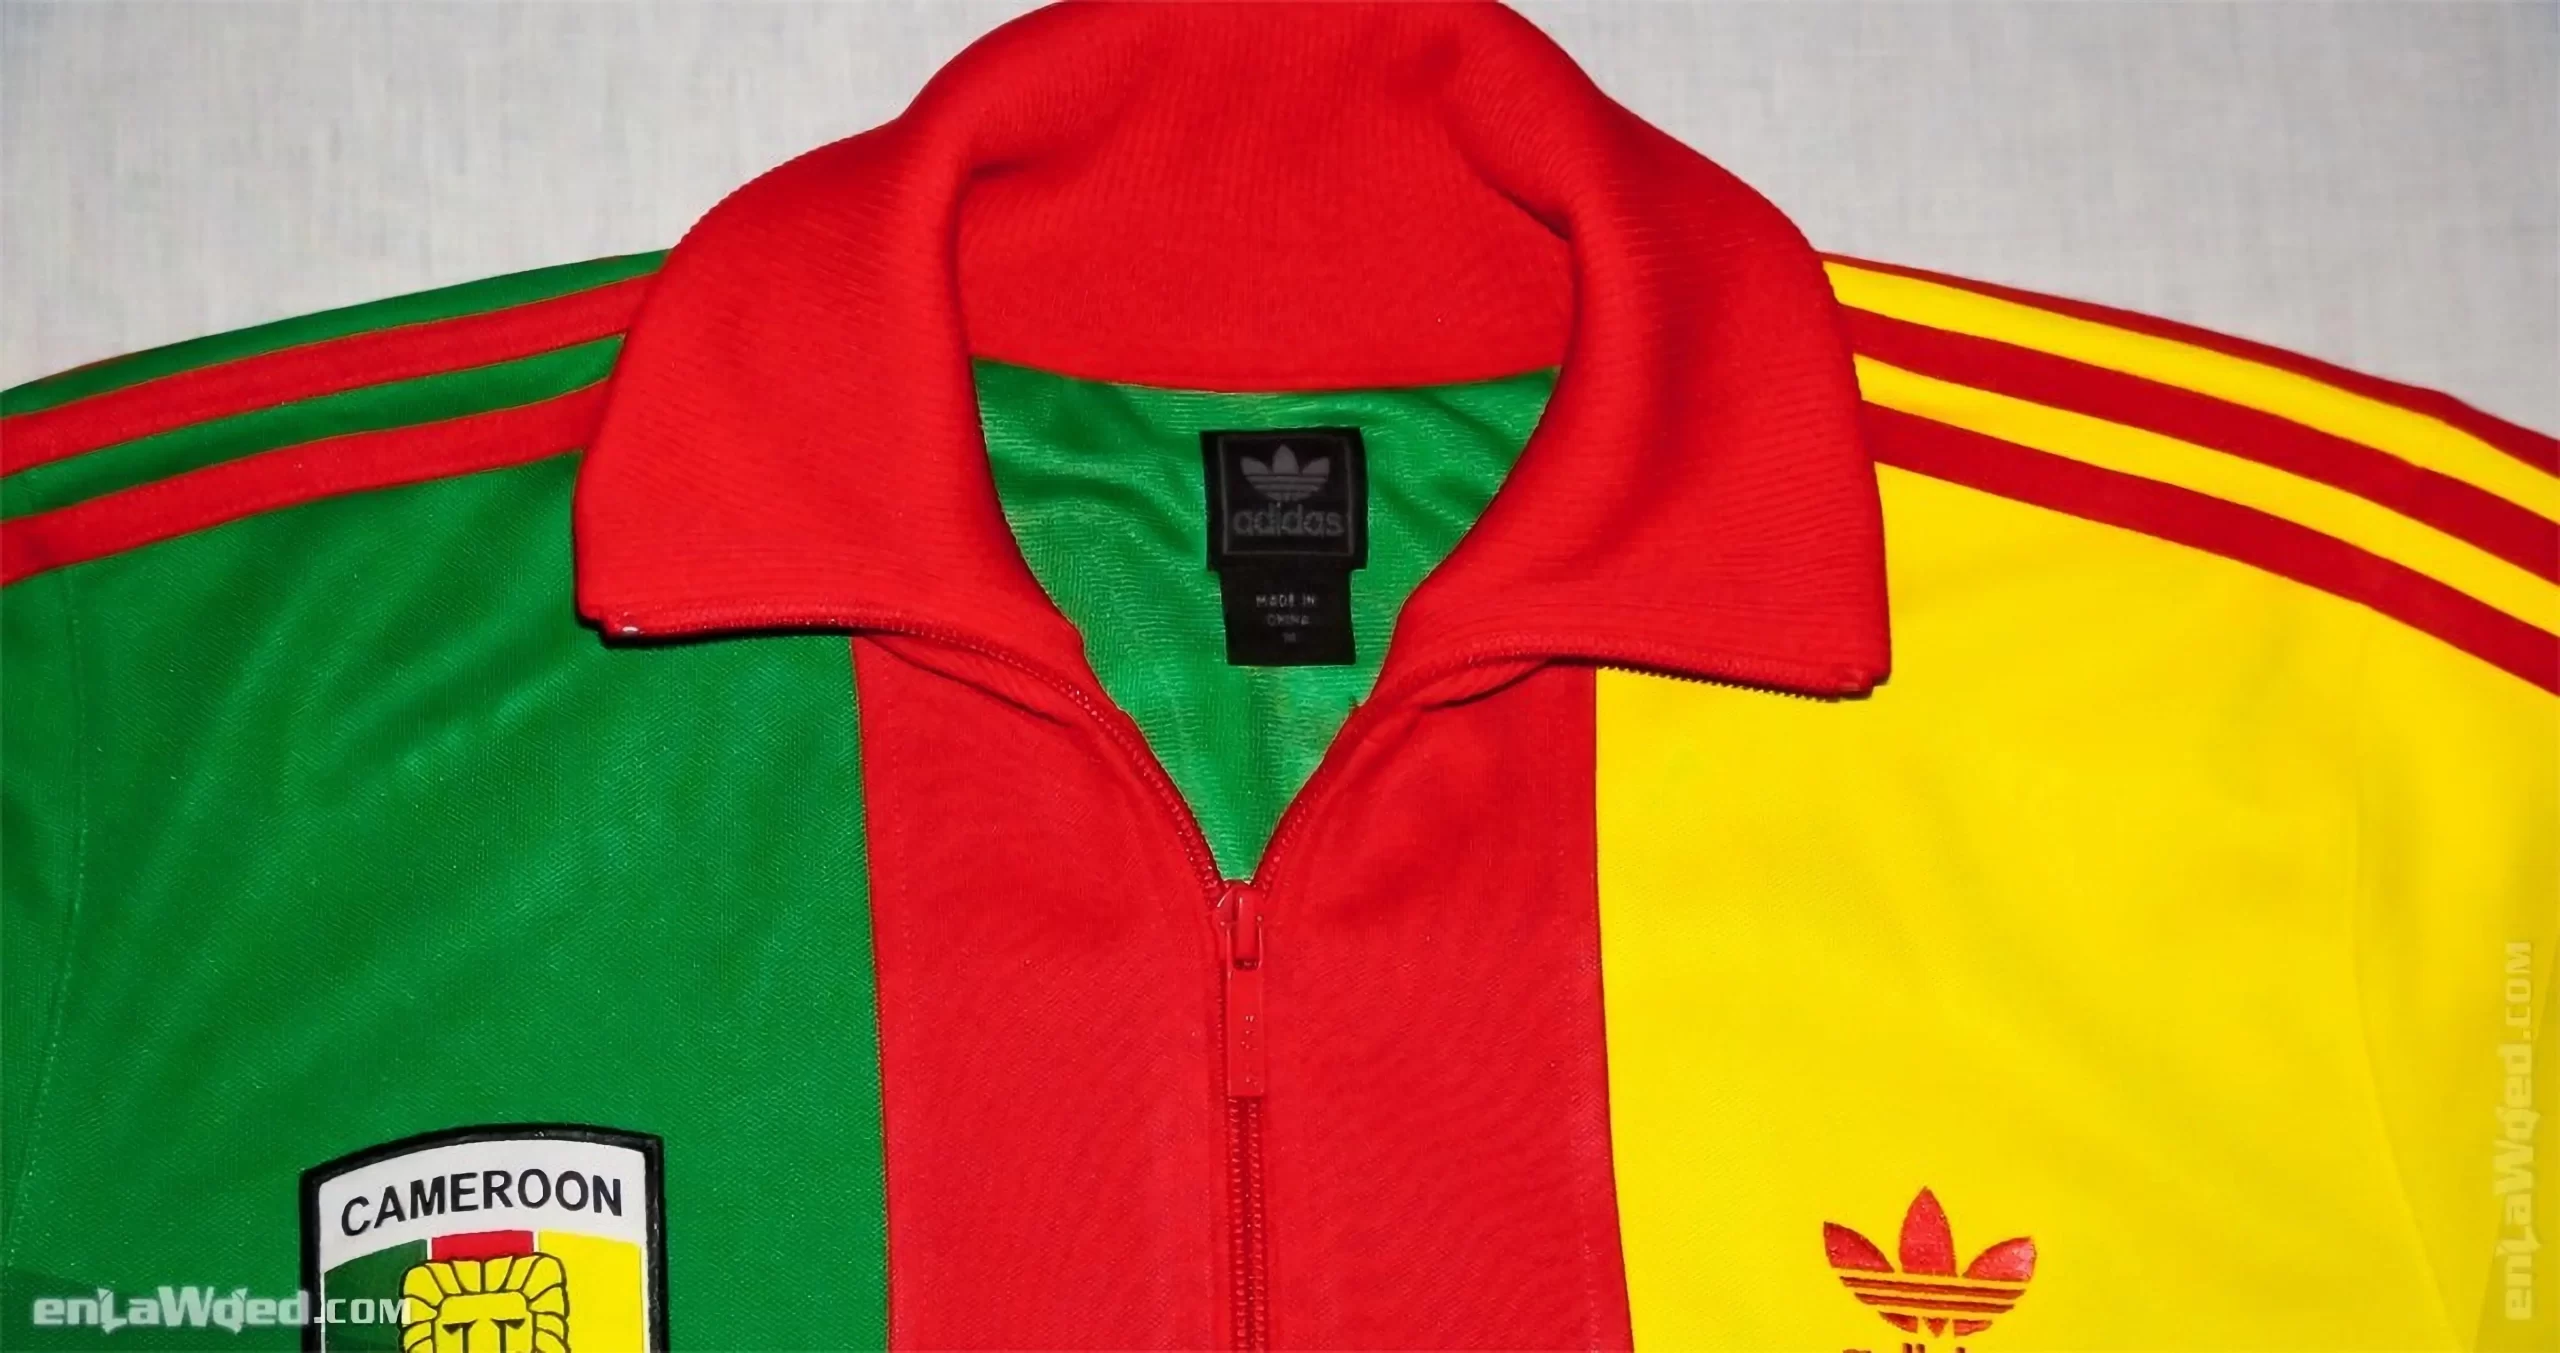 9th interior view of the Adidas Originals Cameroon Track Top